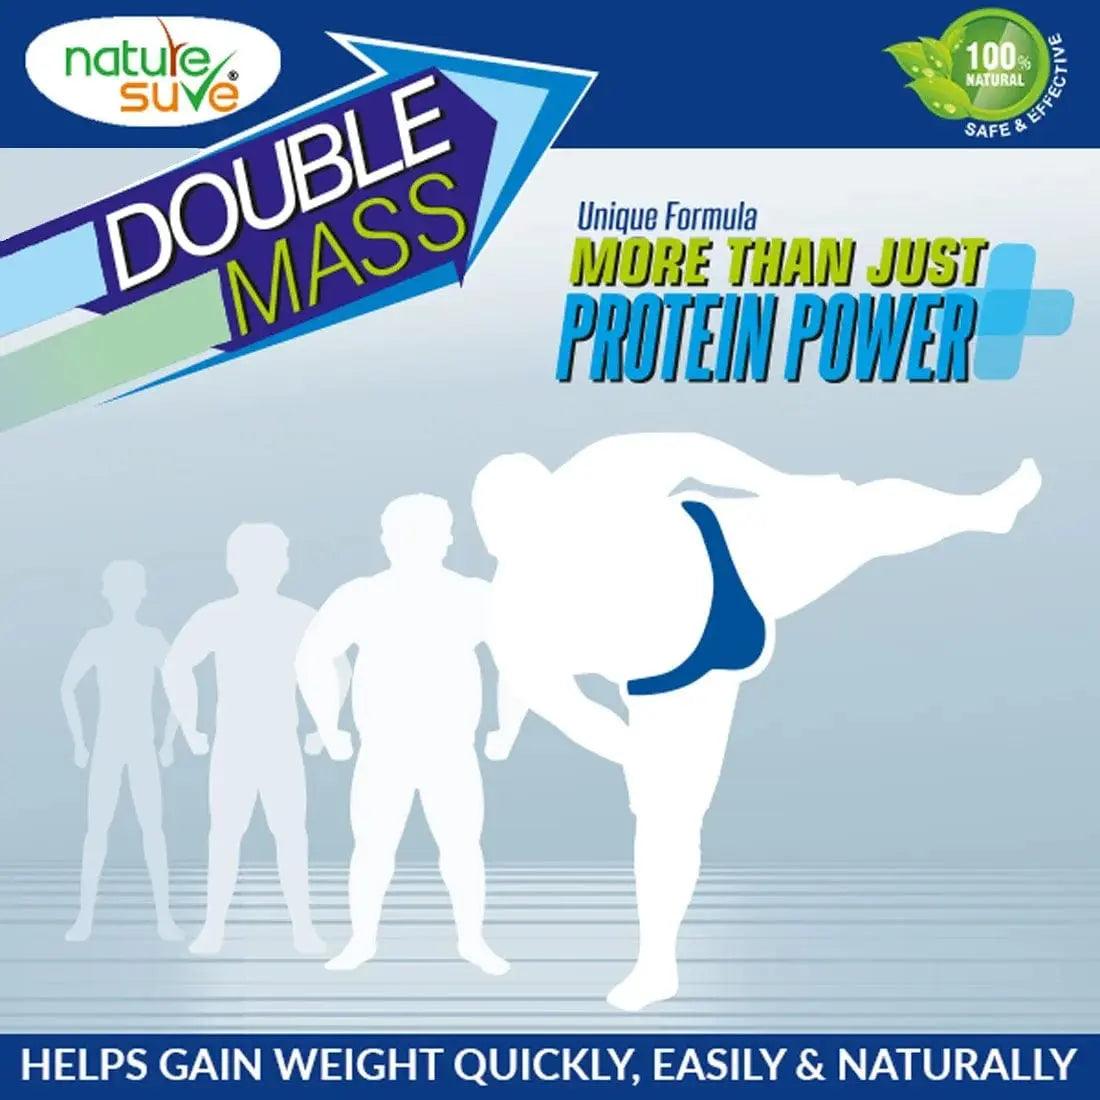 Nature Sure Double Mass Tablets for Men and Women (90 Tablets)